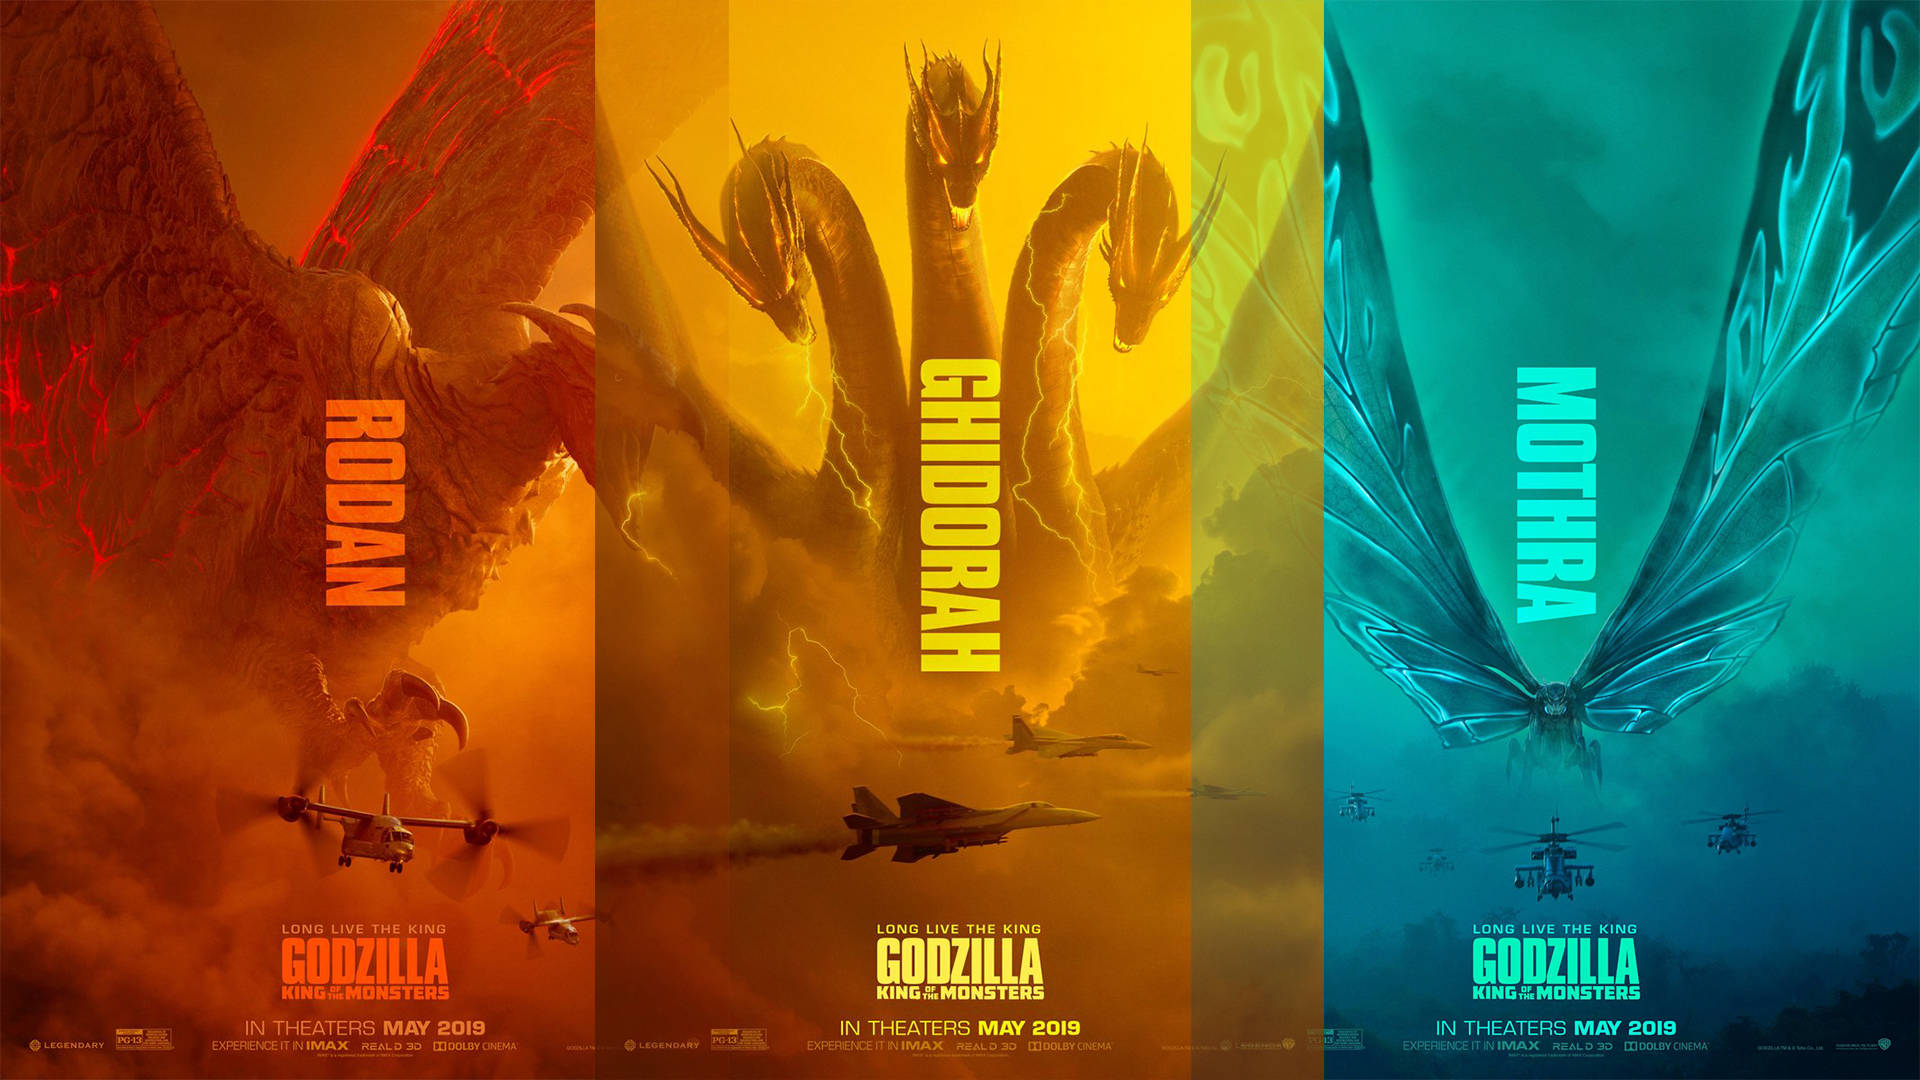 Free Godzilla King Of The Monsters Wallpaper Downloads, [100+] Godzilla  King Of The Monsters Wallpapers for FREE 